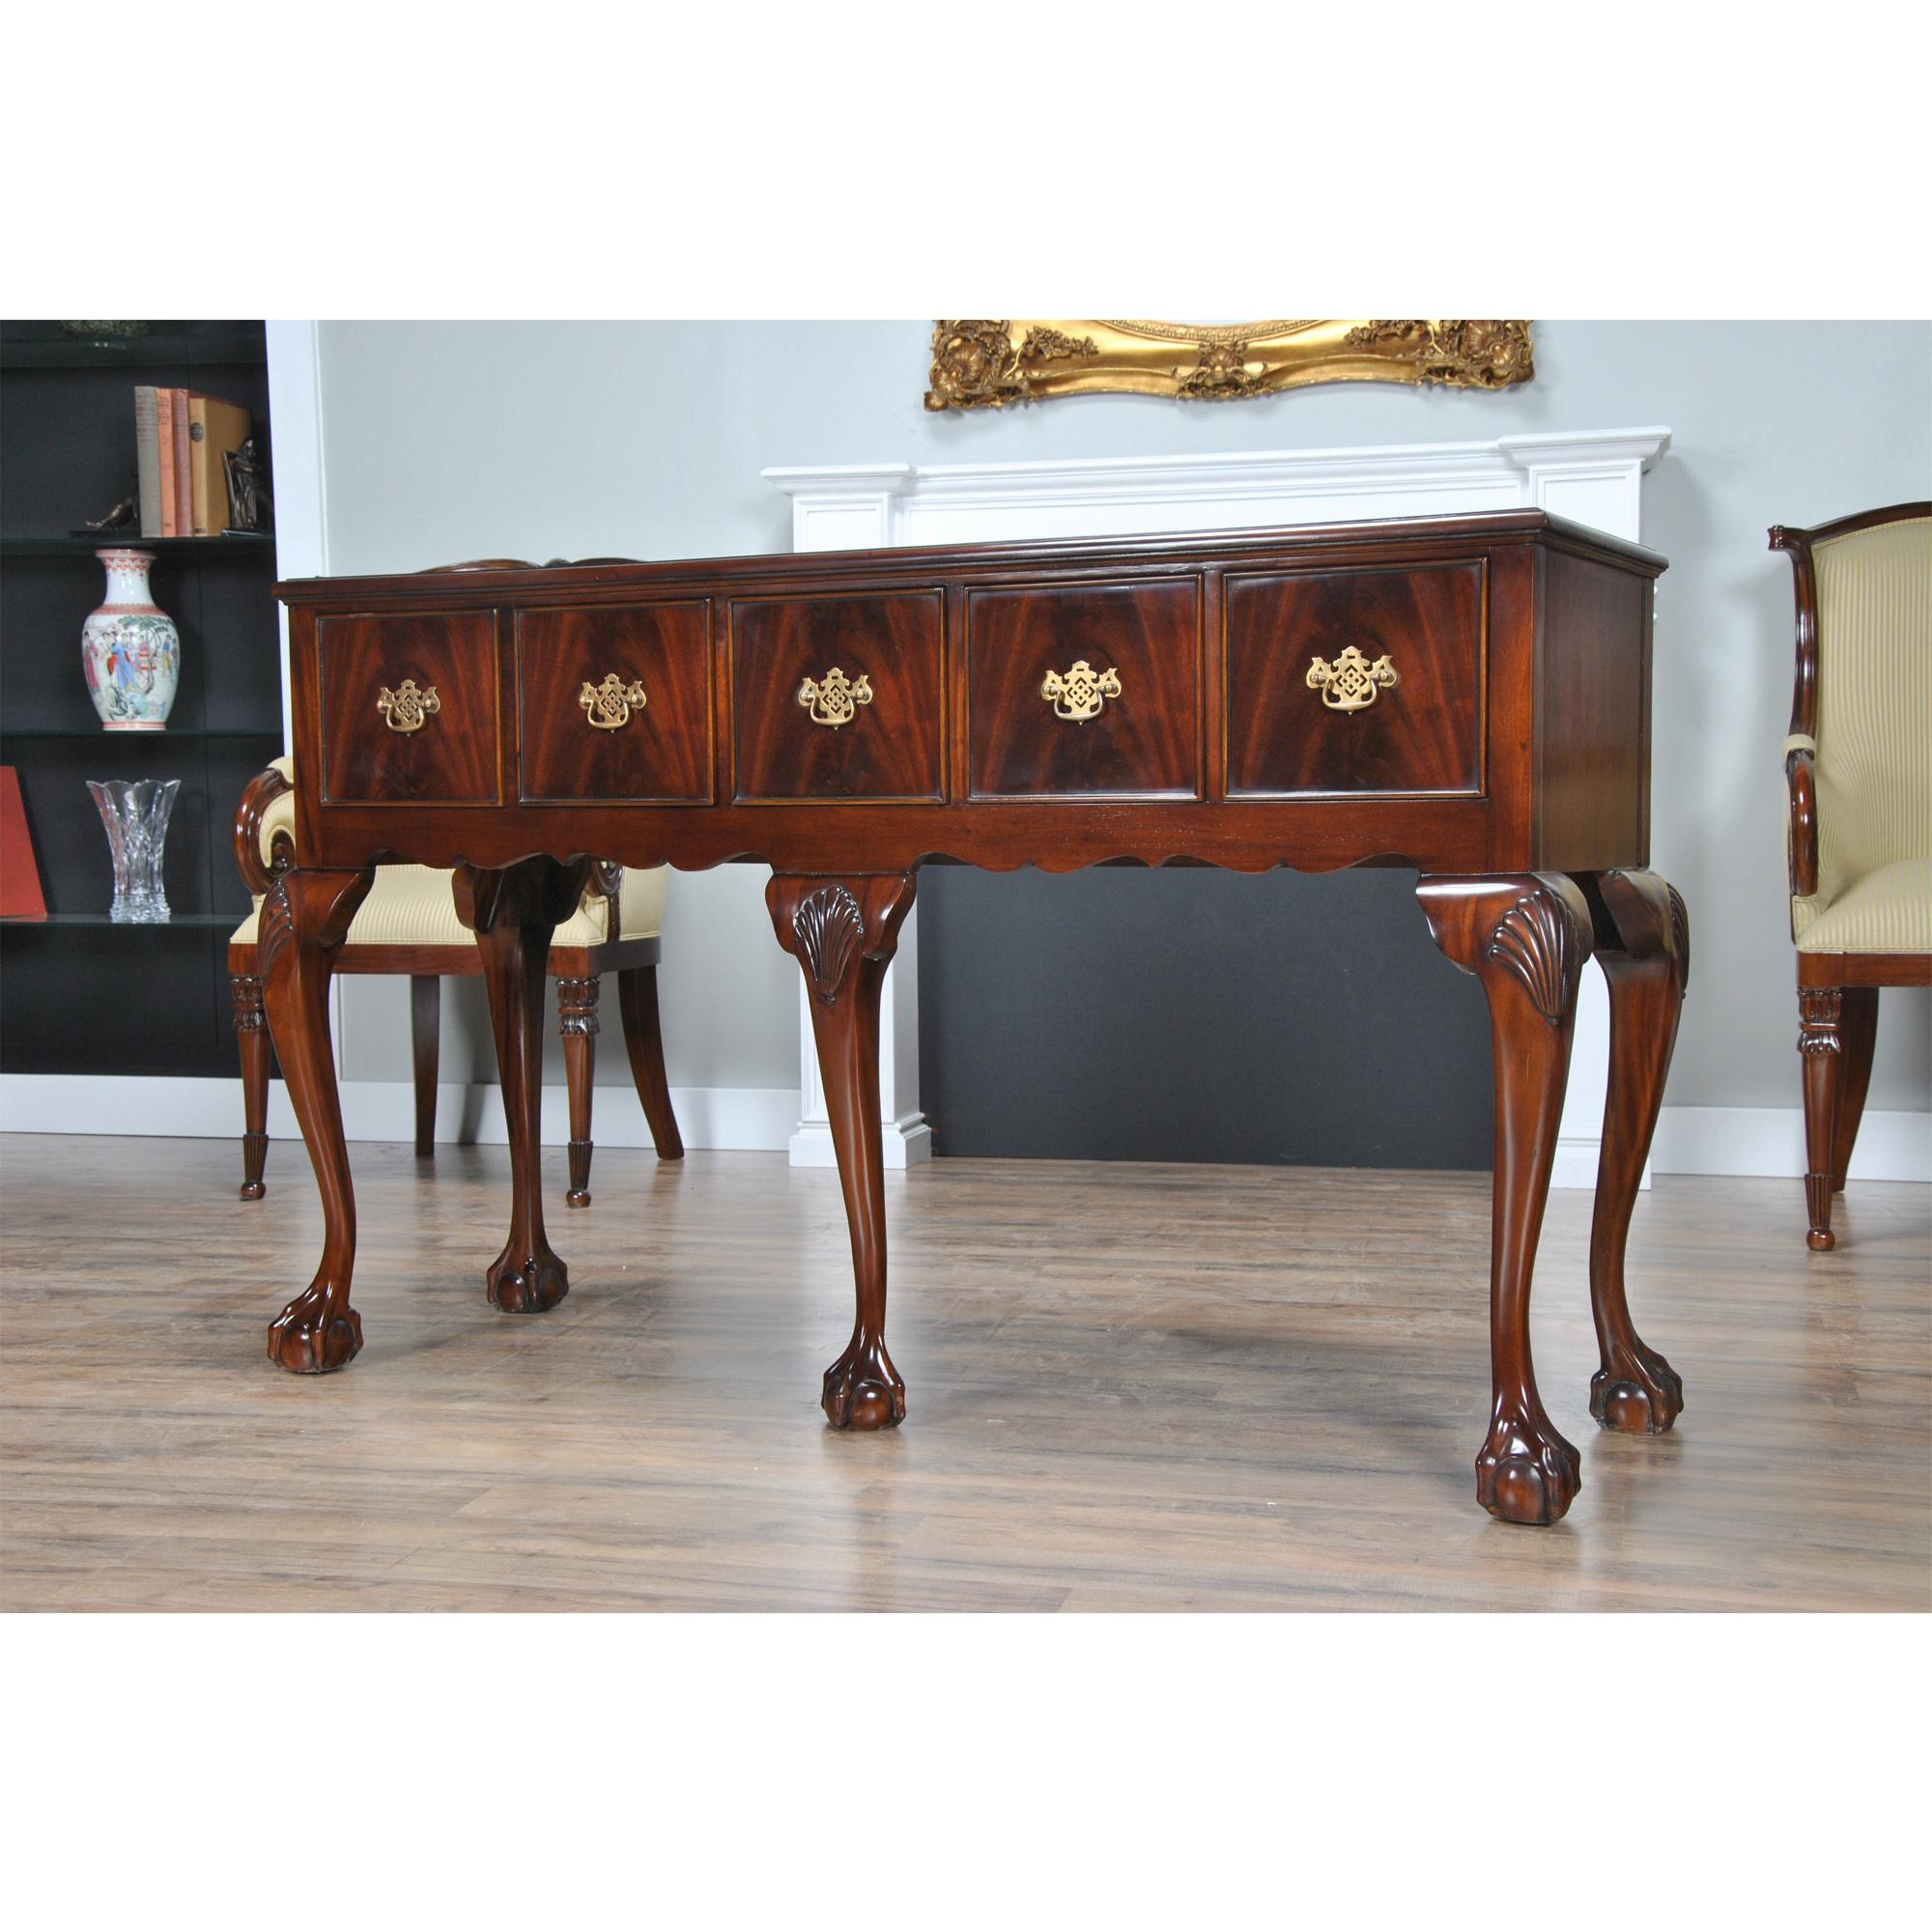 The Mahogany Hunt Board was inspired by antique pieces used in great homes in the Southern United States. This type of sideboard is often also referred to as a Hunt Board.  Narrow in depth the raised leg construction gives a great appearance with